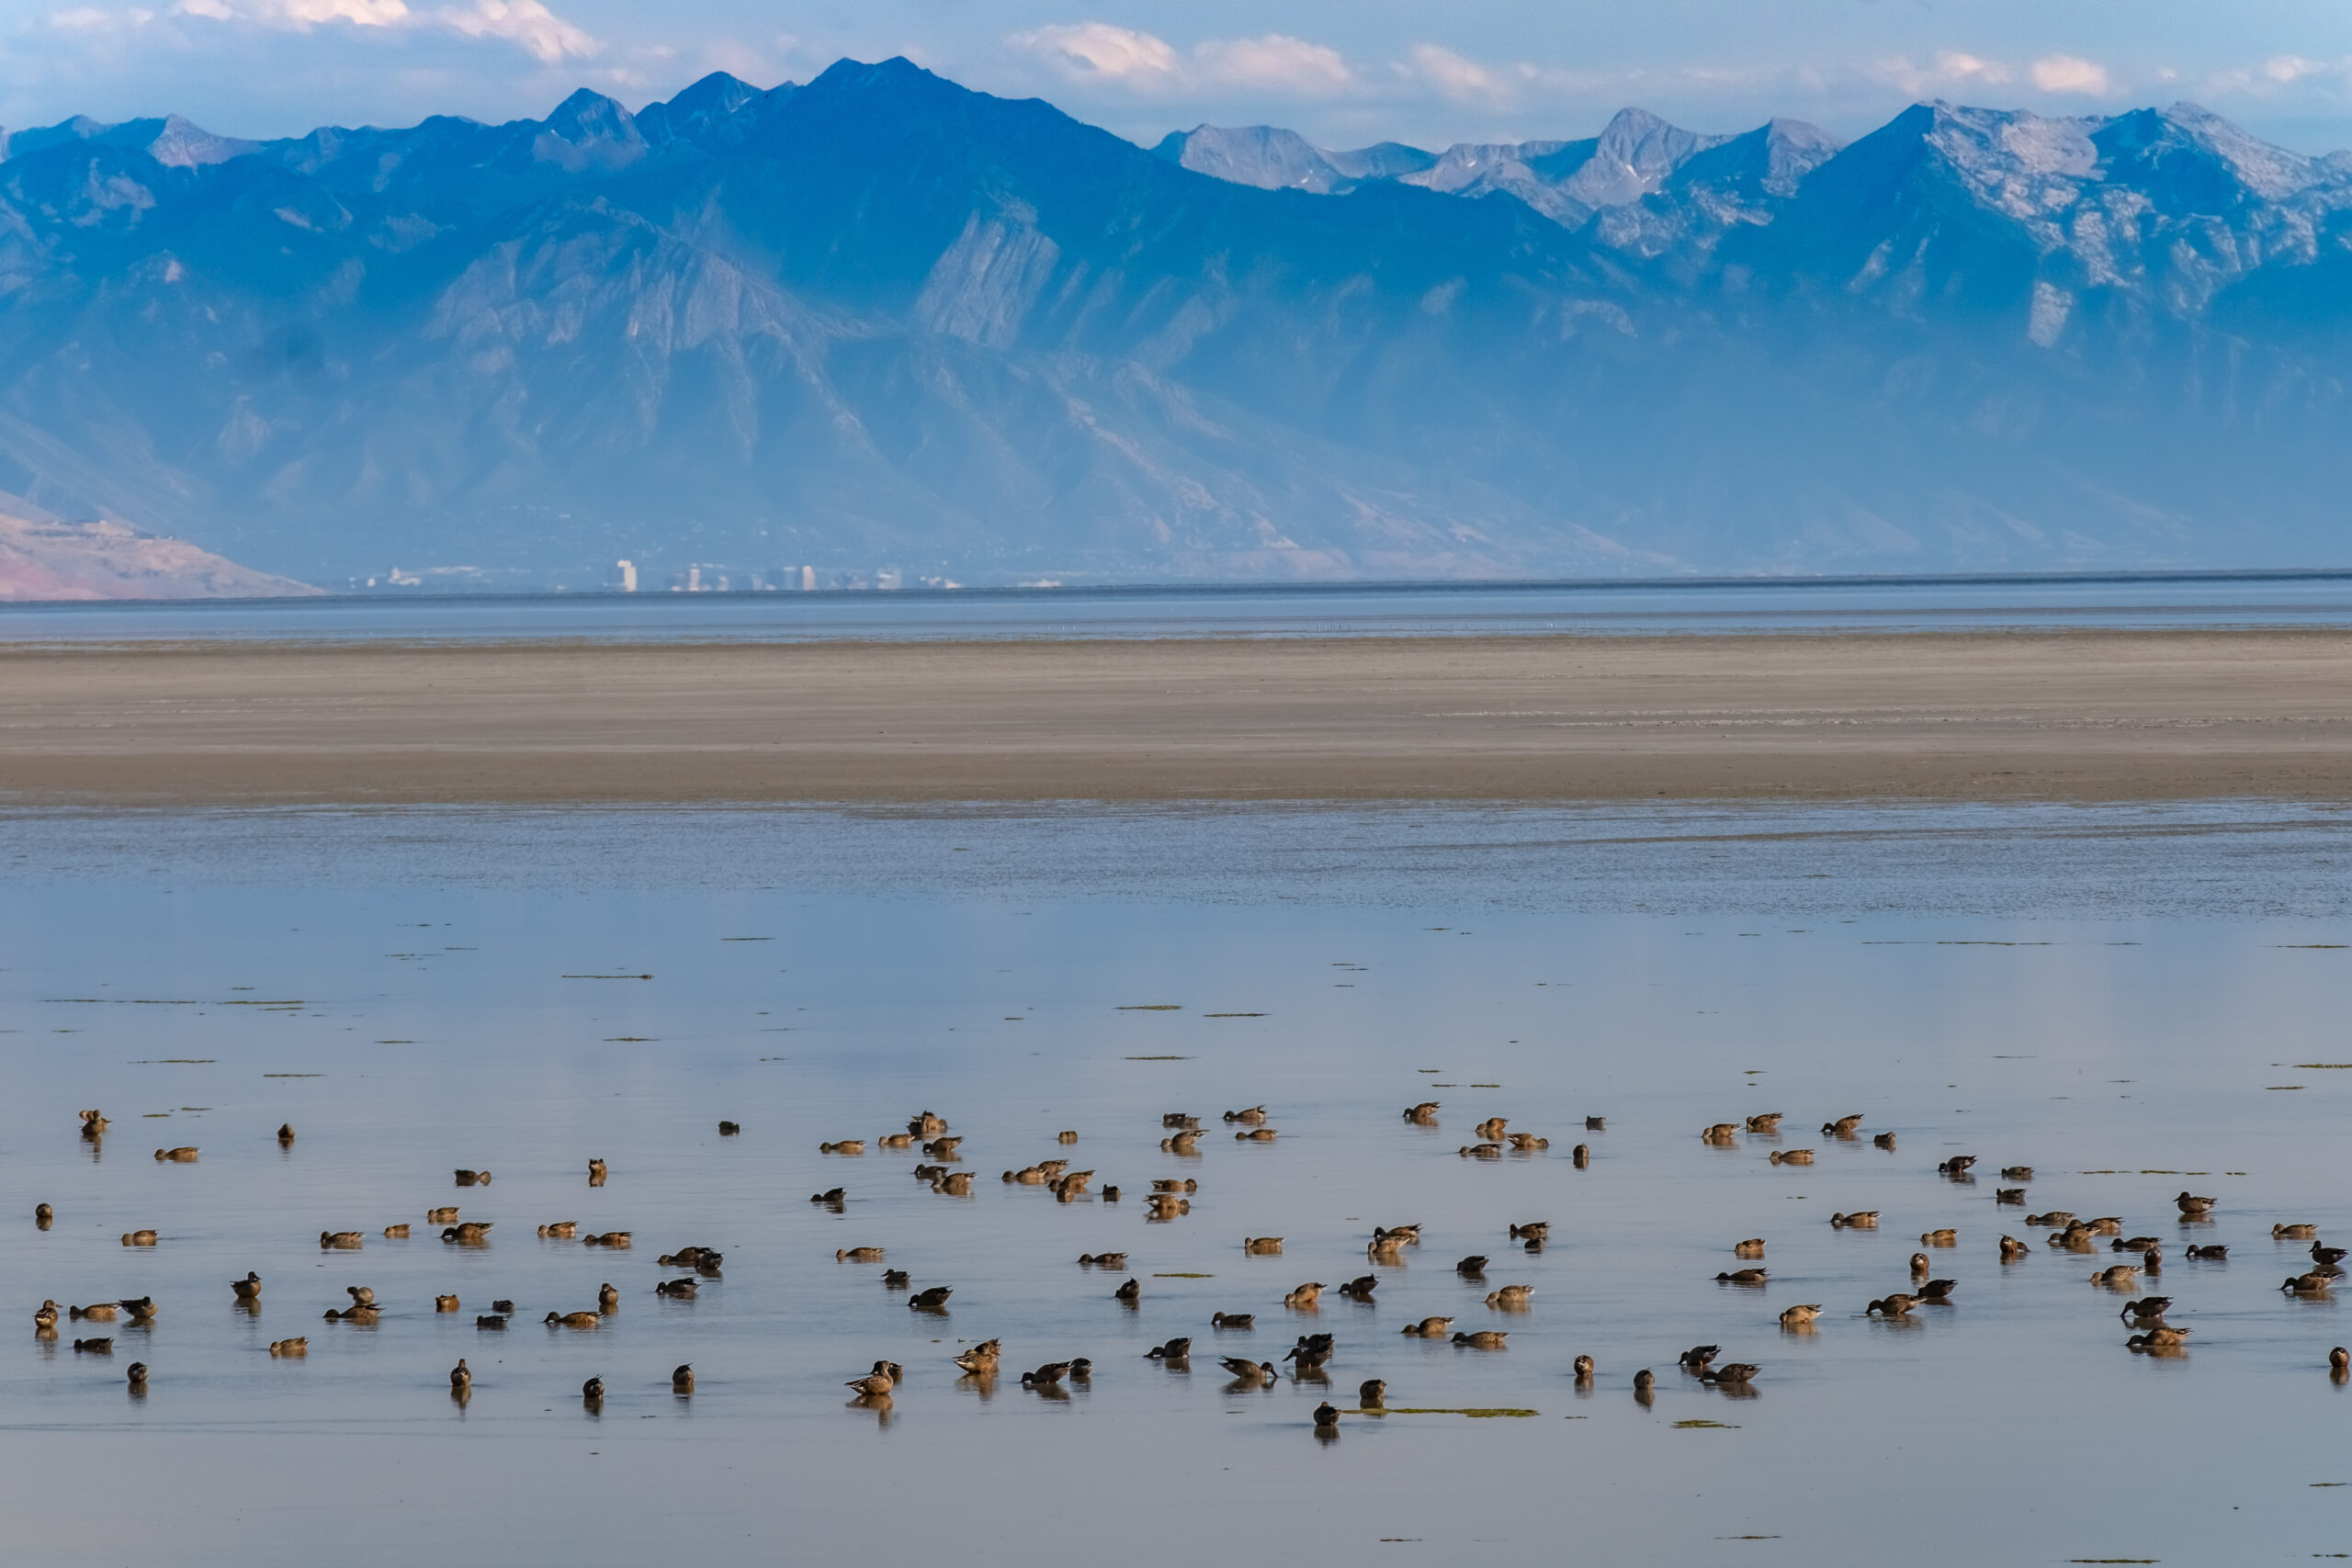 Migratory waterfowl are in dire straits as the Great Salt Lake dries up.